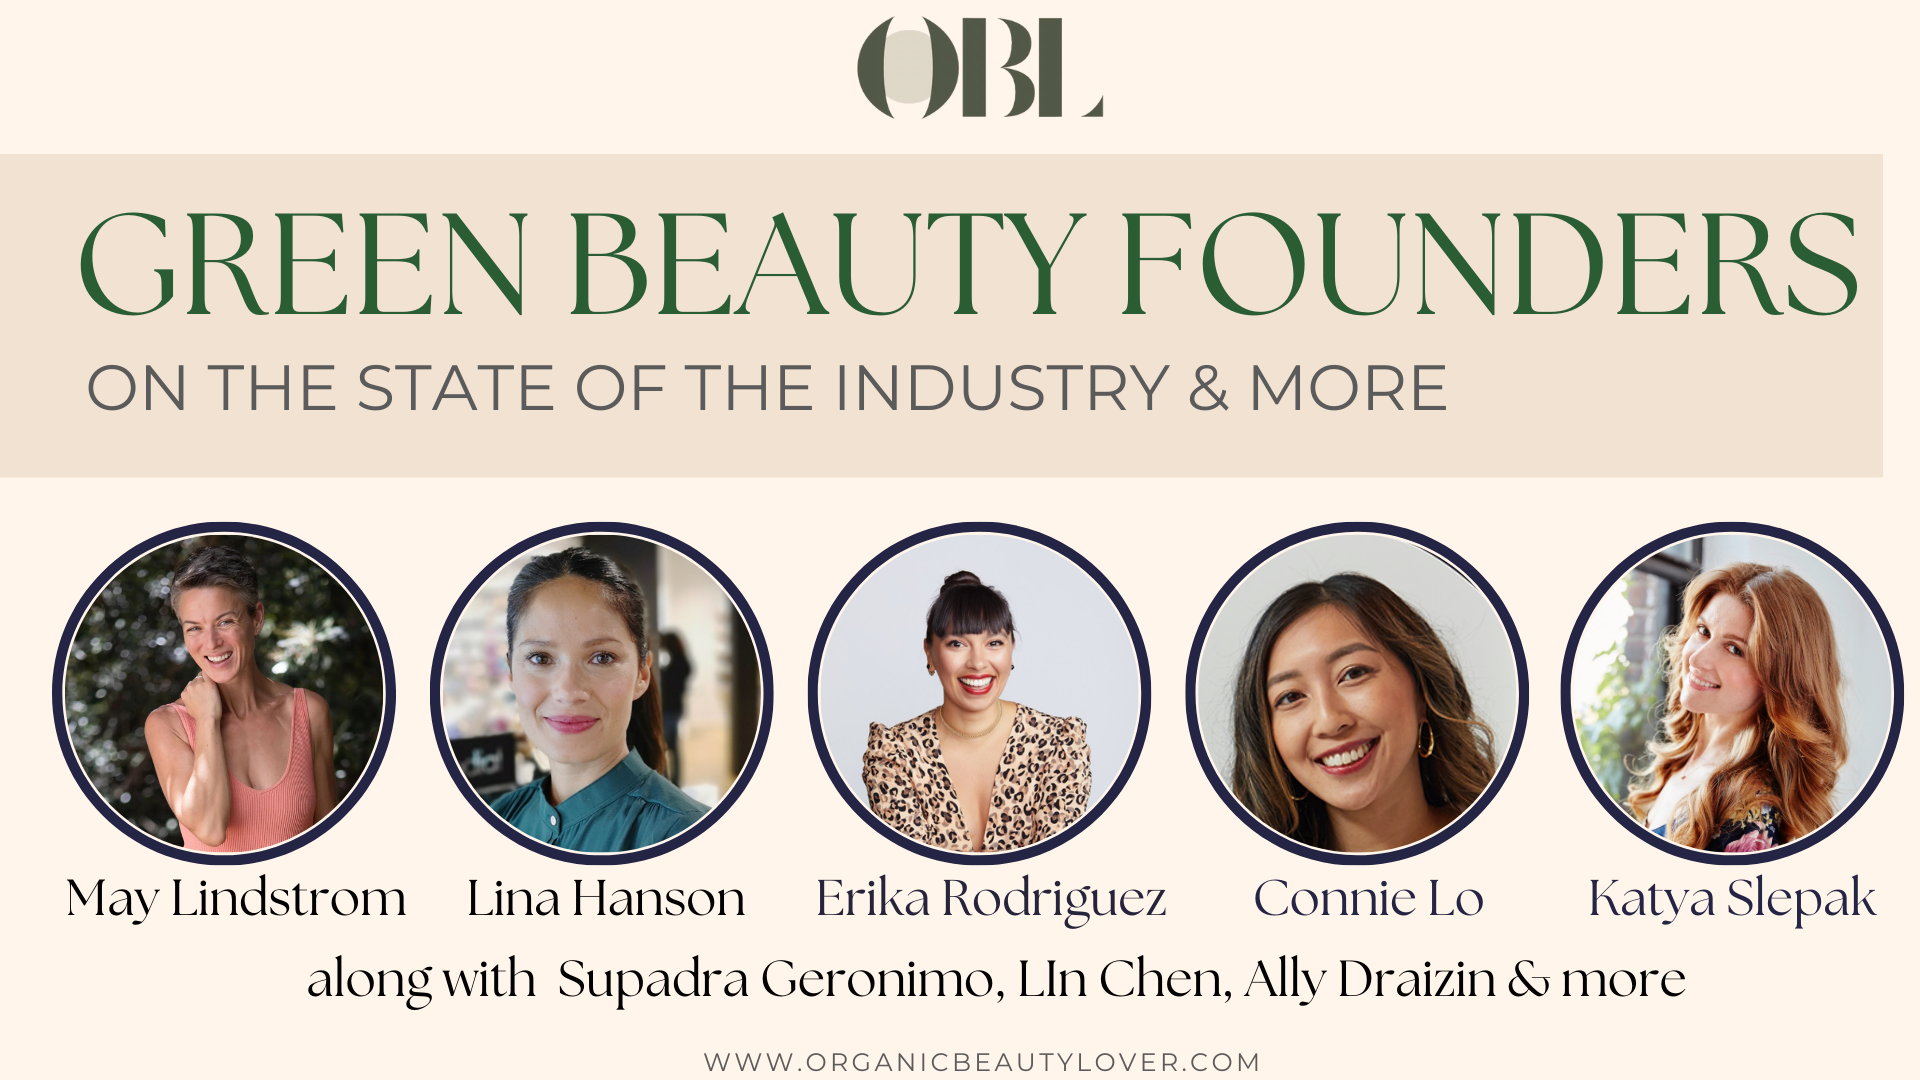 Clean Beauty Brand Founders on the Industry Today (& their next steps)